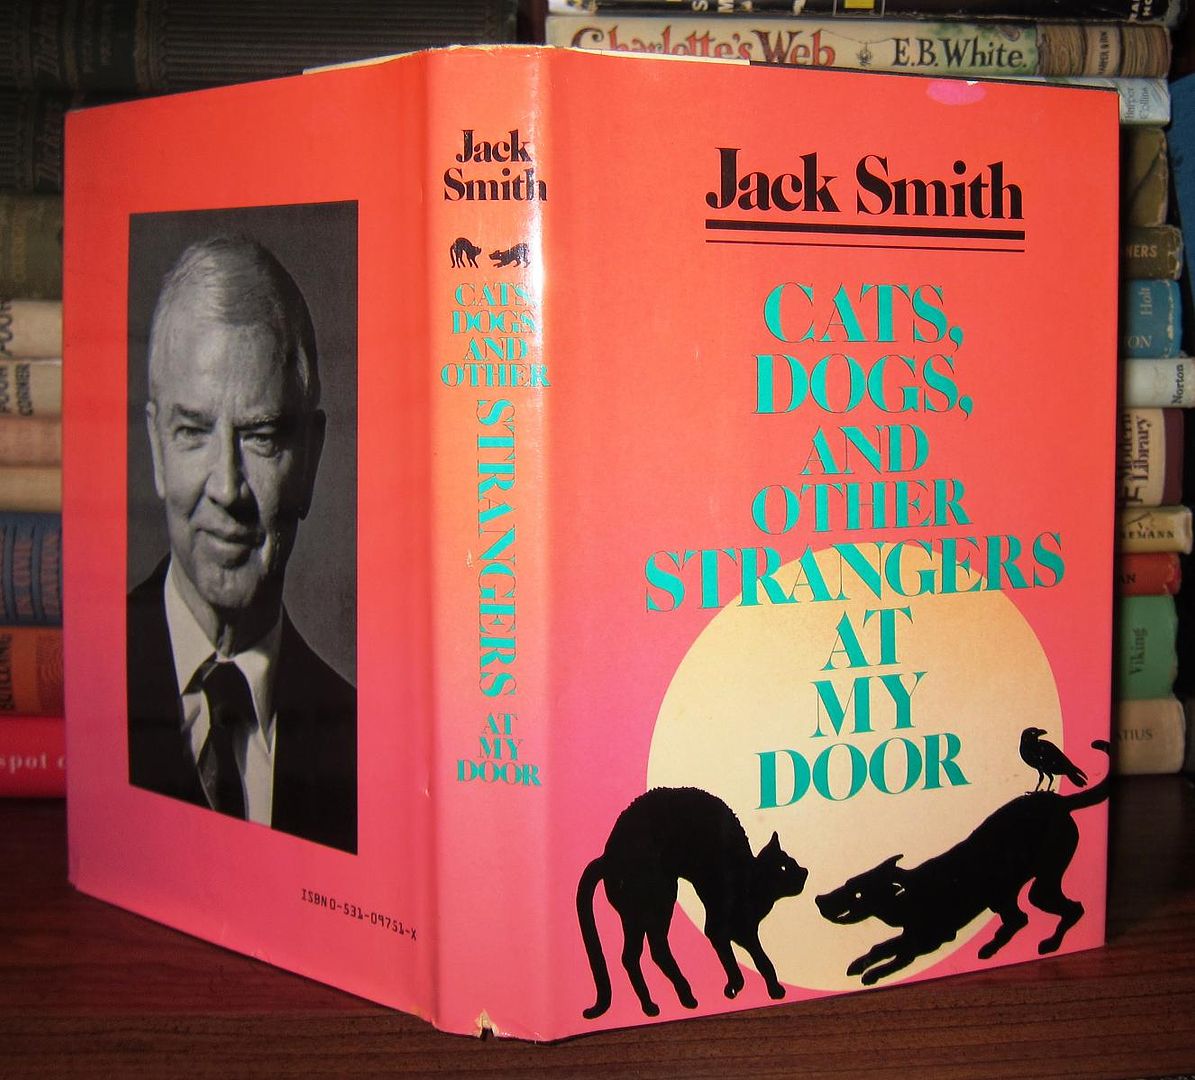 SMITH, JACK - Cats, Dogs, and Other Strangers at My Door